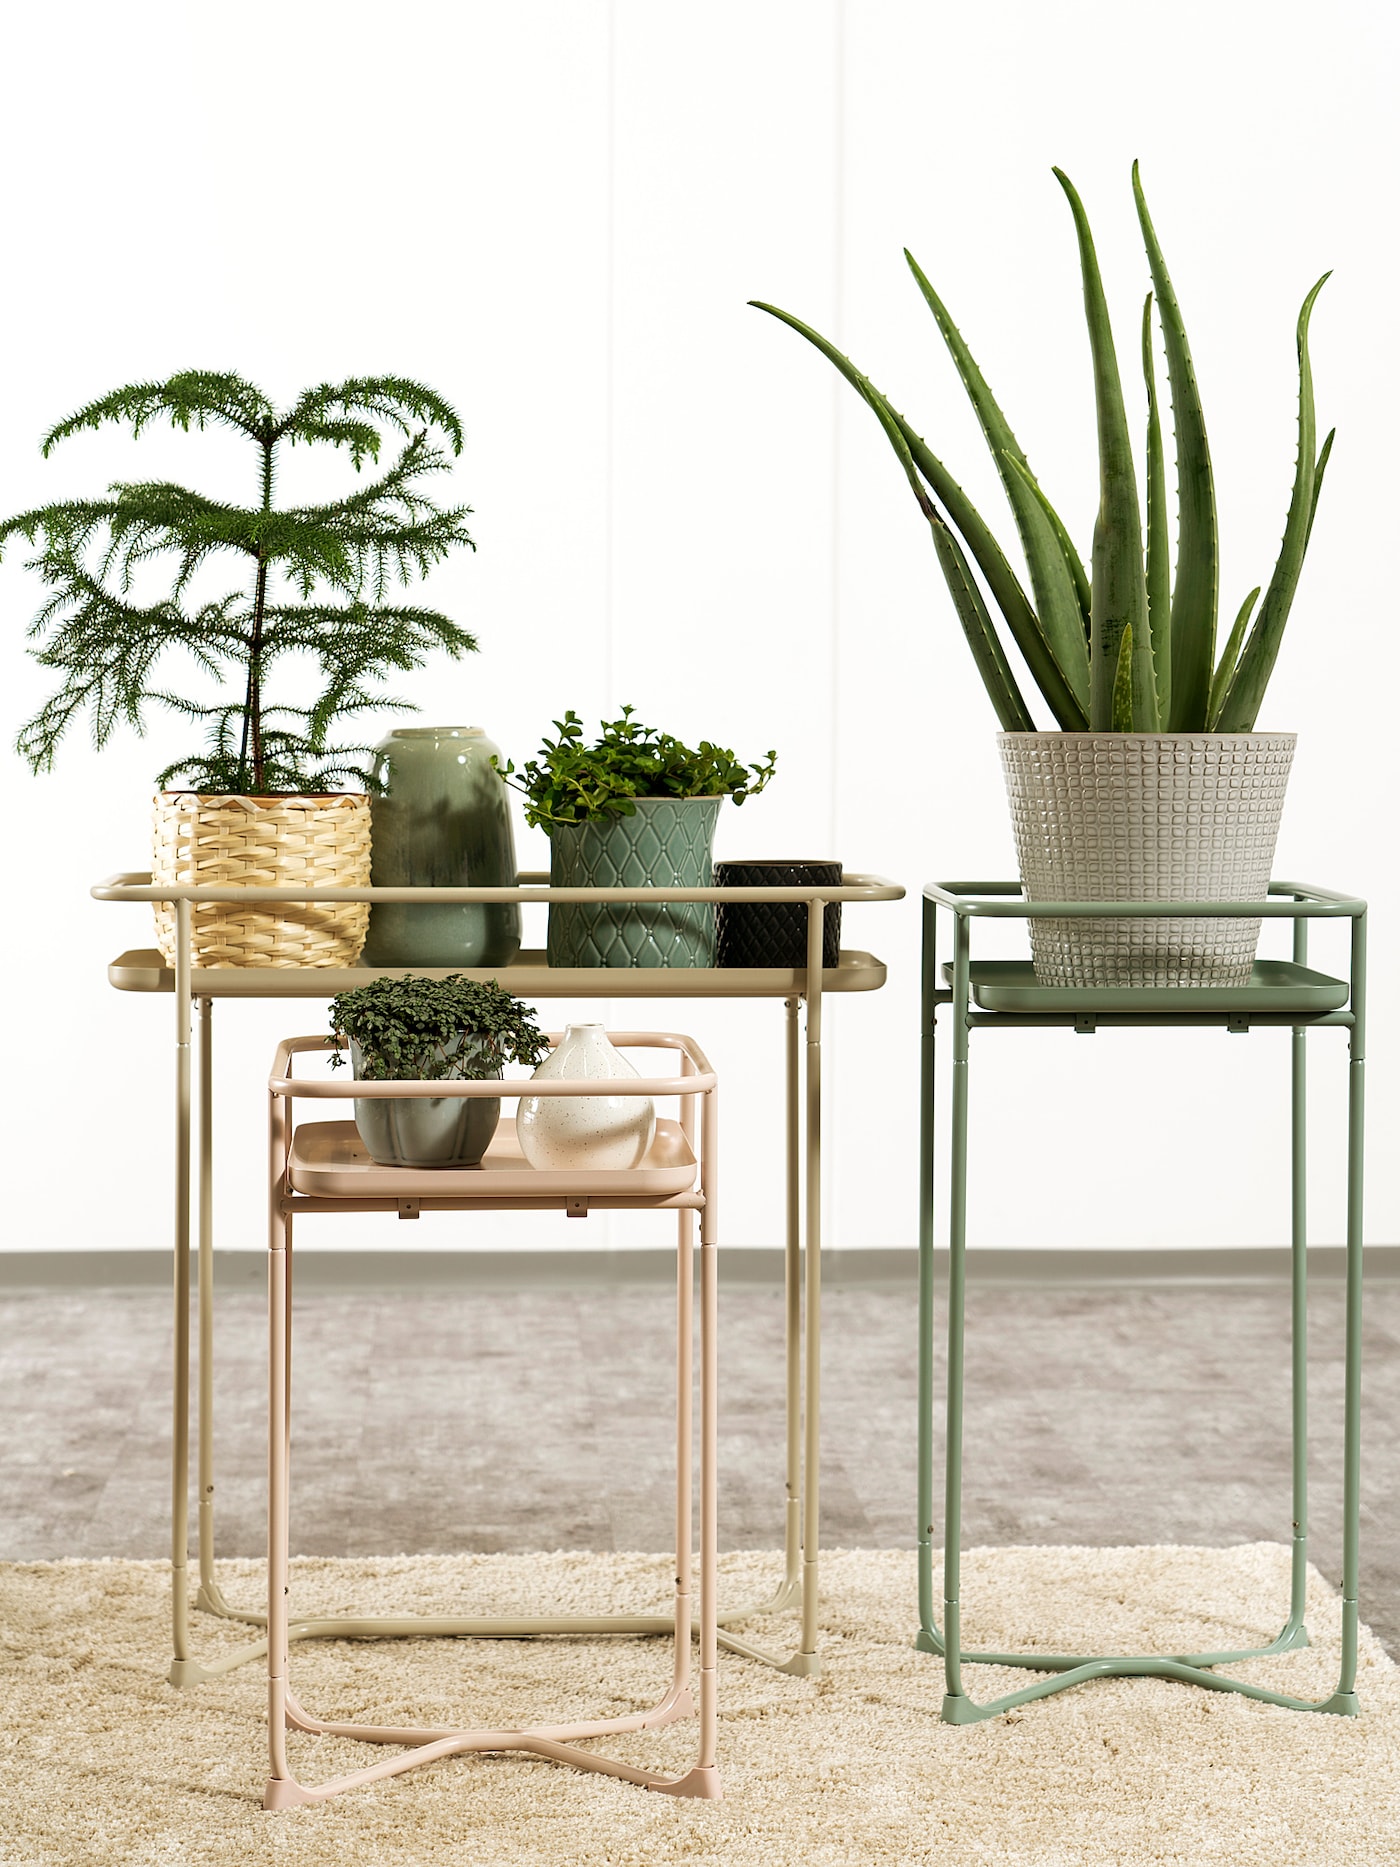 Outdoor-plant-stands-from-IKEA-19498.jpg